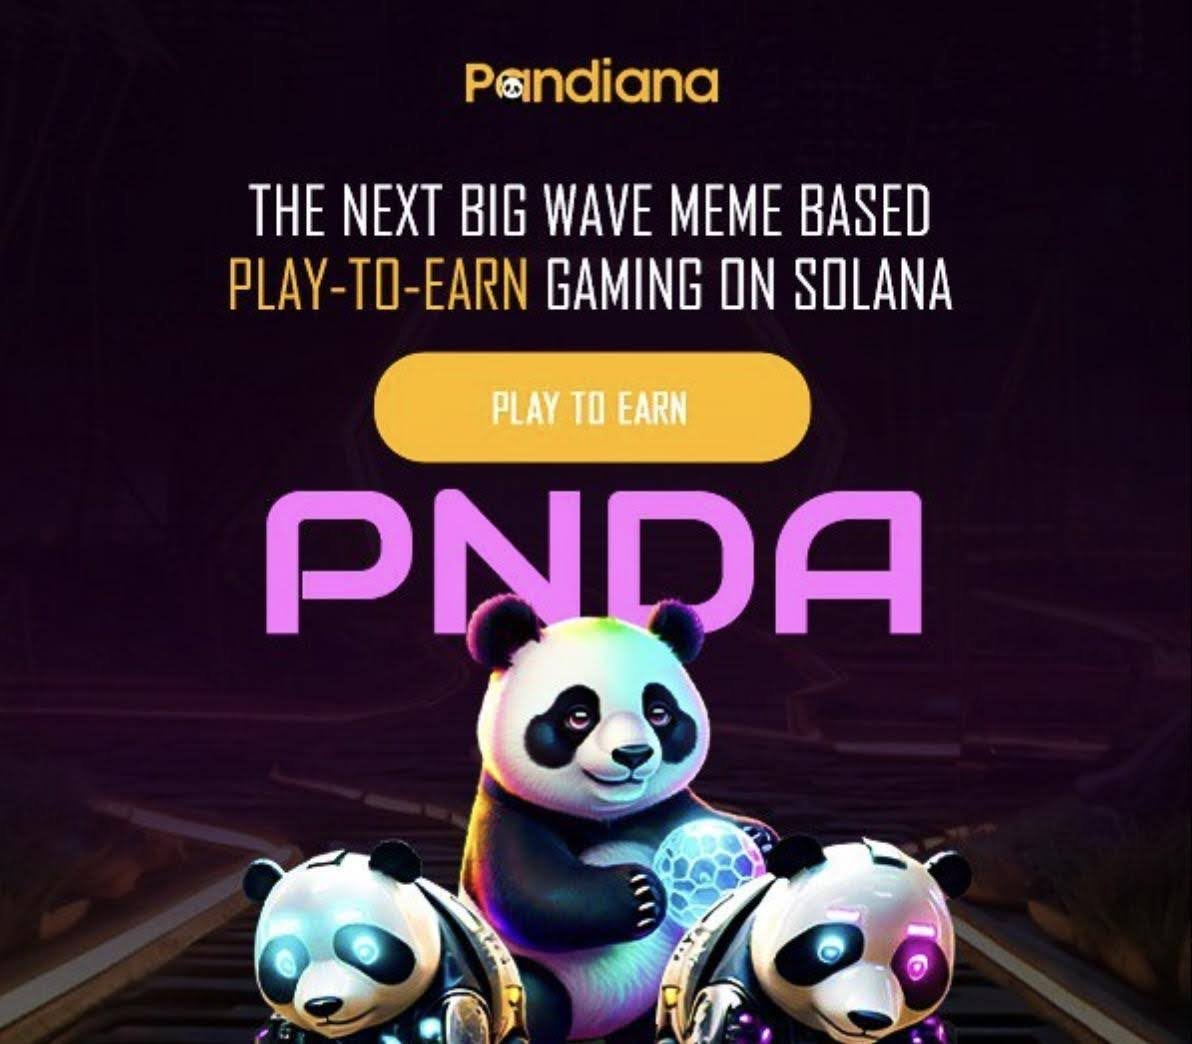 How Pandiana Sets Itself Apart From Other Memecoins, Set To Launch $PNDA Token On Solana